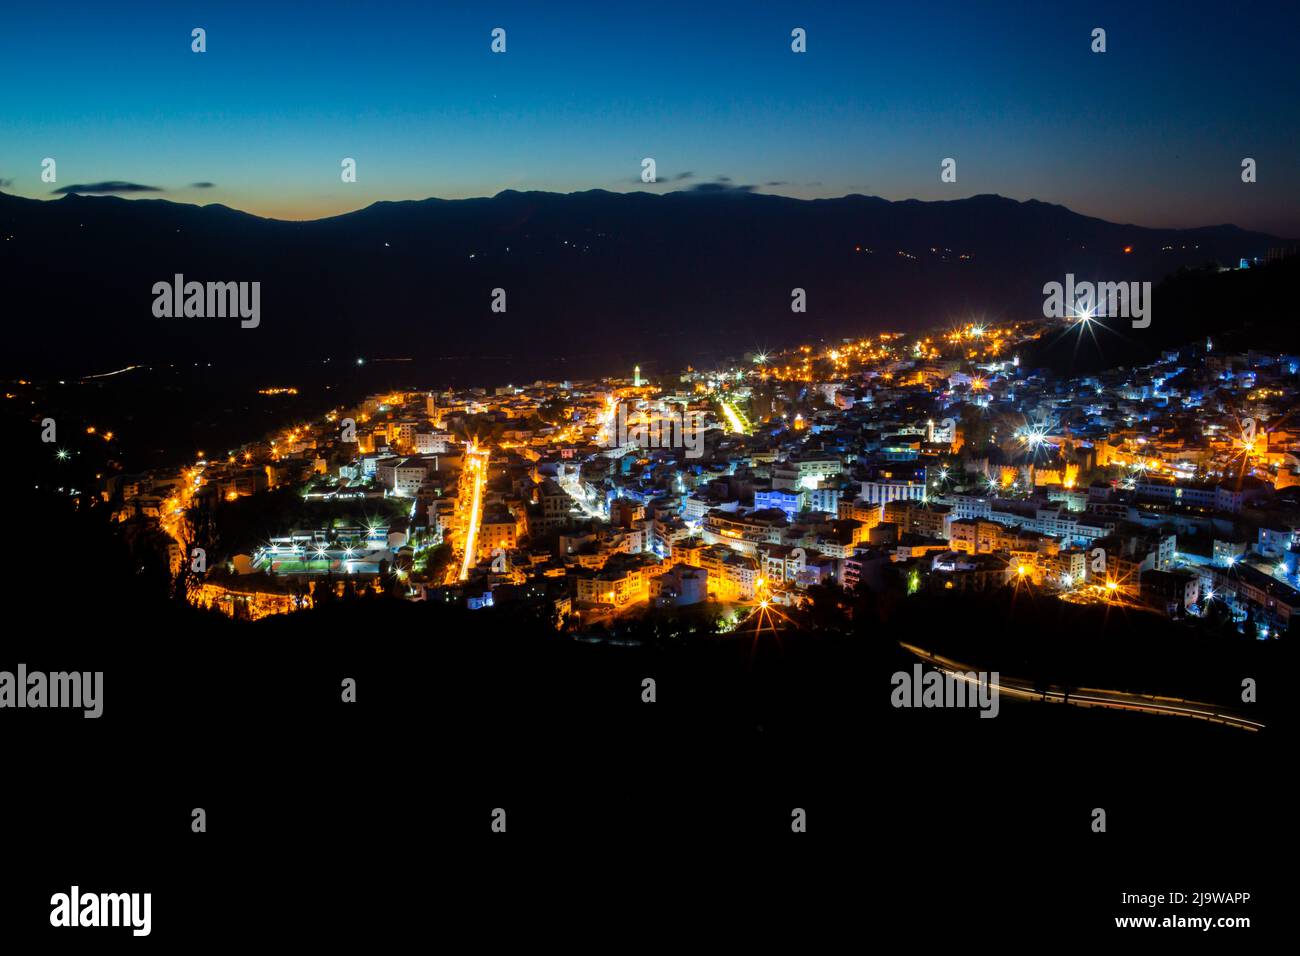 Cityscape of the blue city Chefchaouen by night Stock Photo